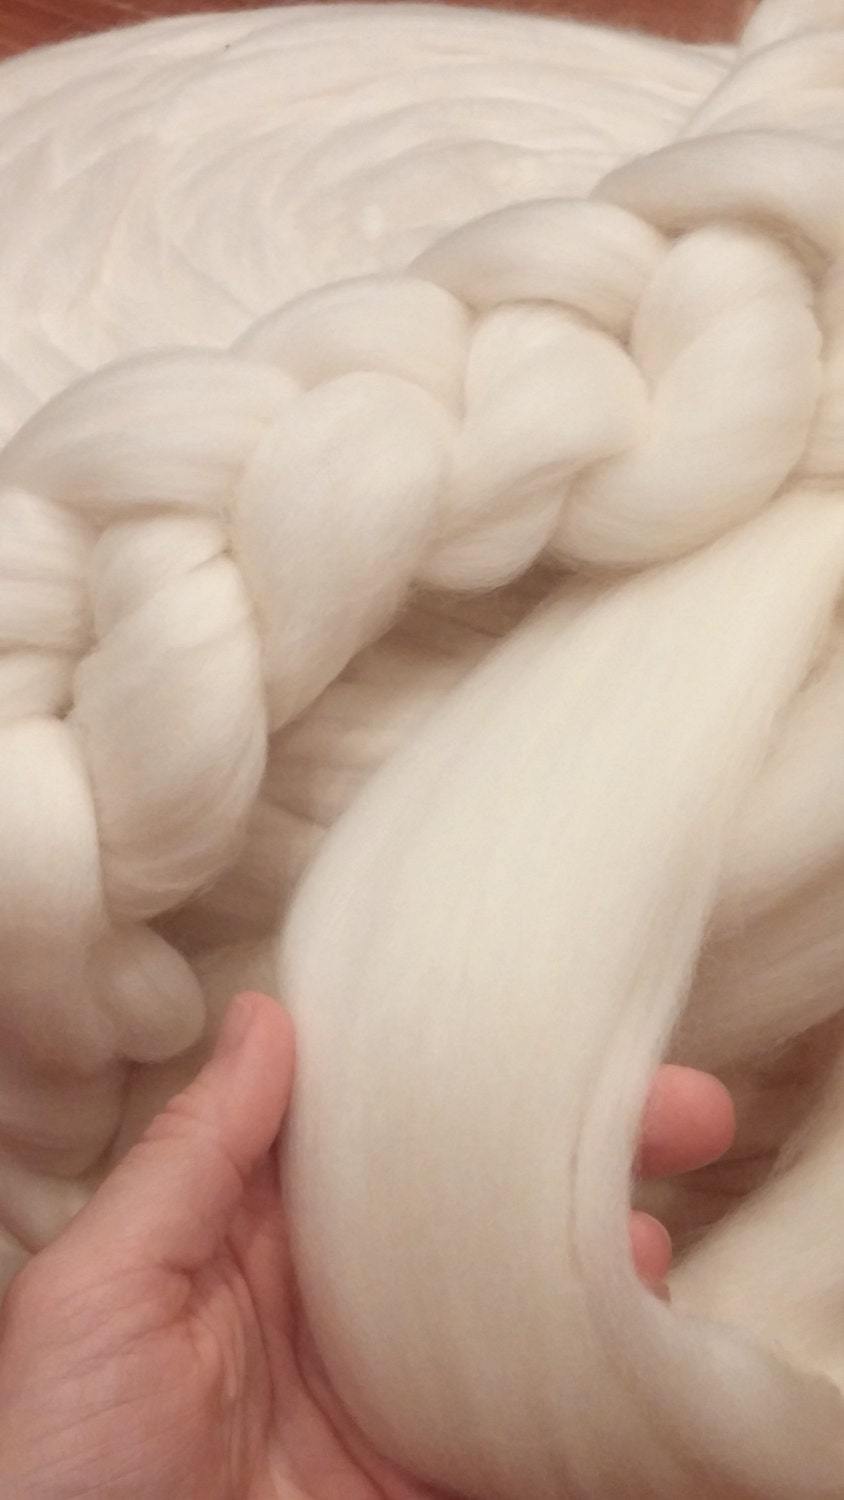 Merino 23 micron Super Soft Natural White Wool Top Roving Fiber, Chunky Knit Blanket throw, Spin, Felting Crafts 25% OFF SUPER SALE!